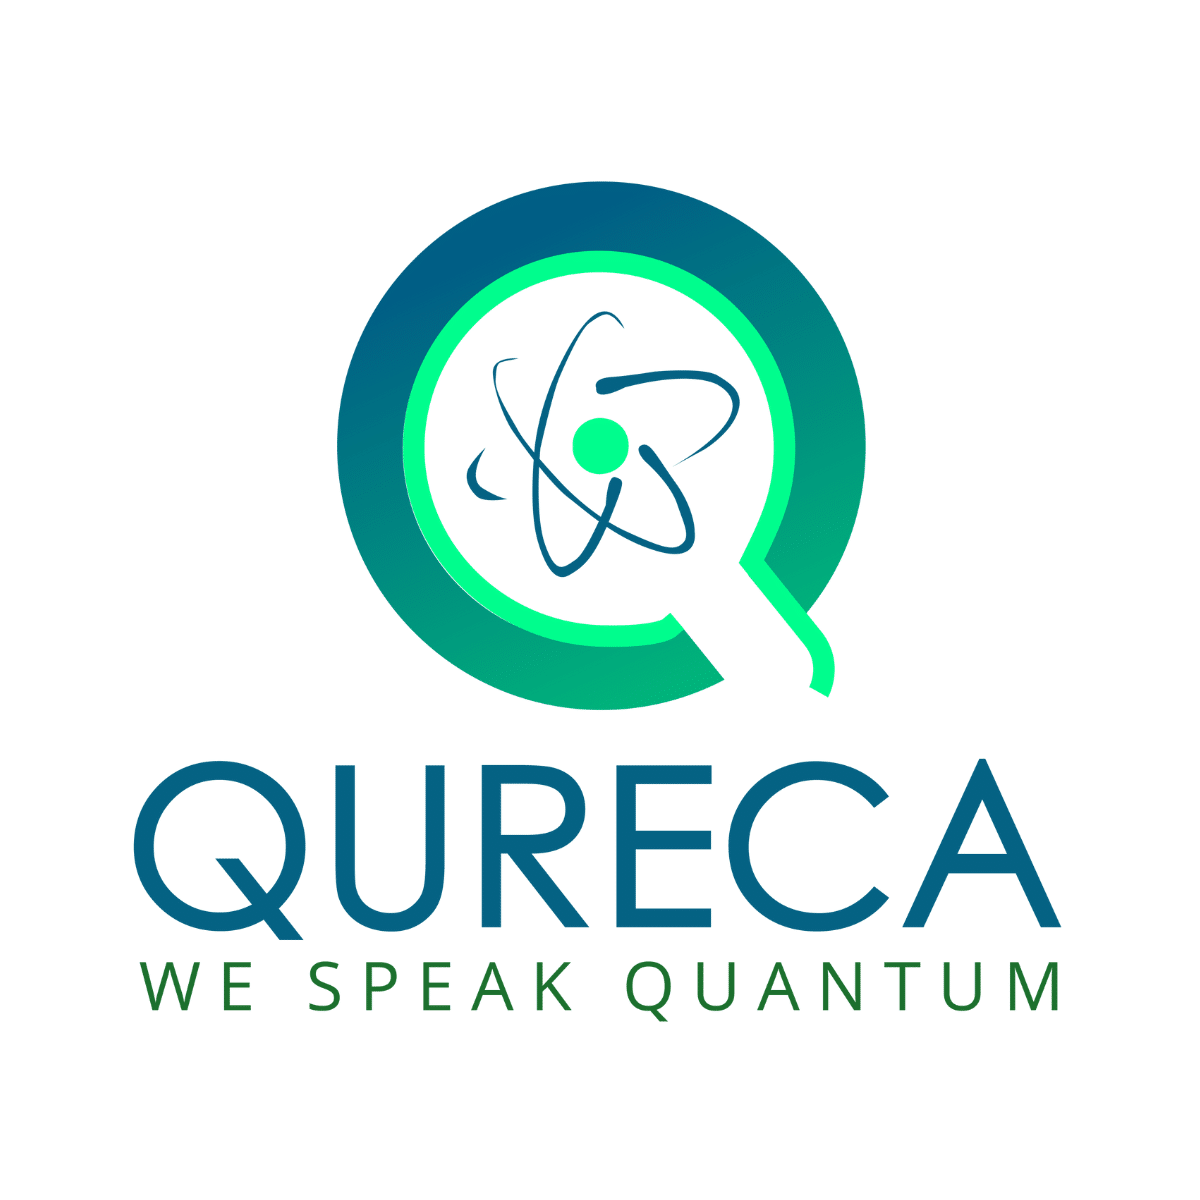 QURECA SPAIN, under the umbrella of QURECA, is the leading company that offers a range of professional services, business development, and the first online platform for training and recruitment, specialised in quantum technologies.